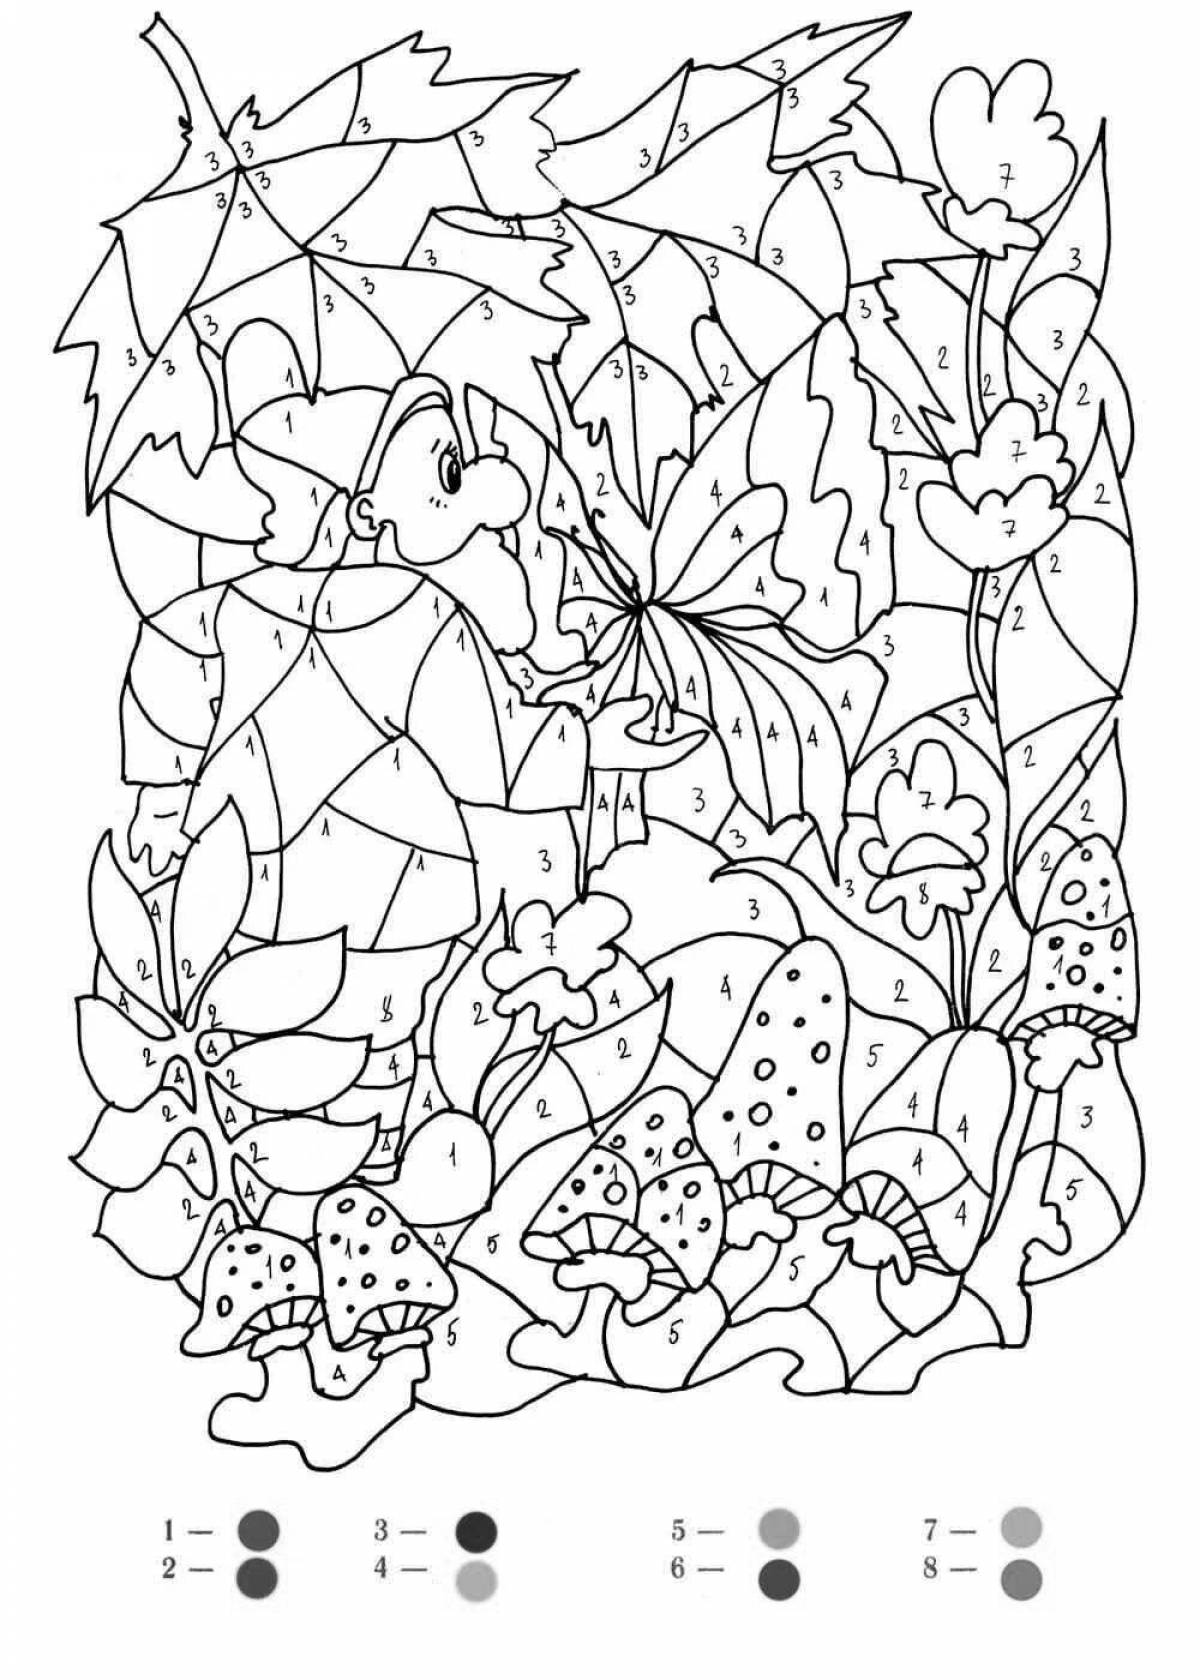 Coloring book glowing coloring by numbers